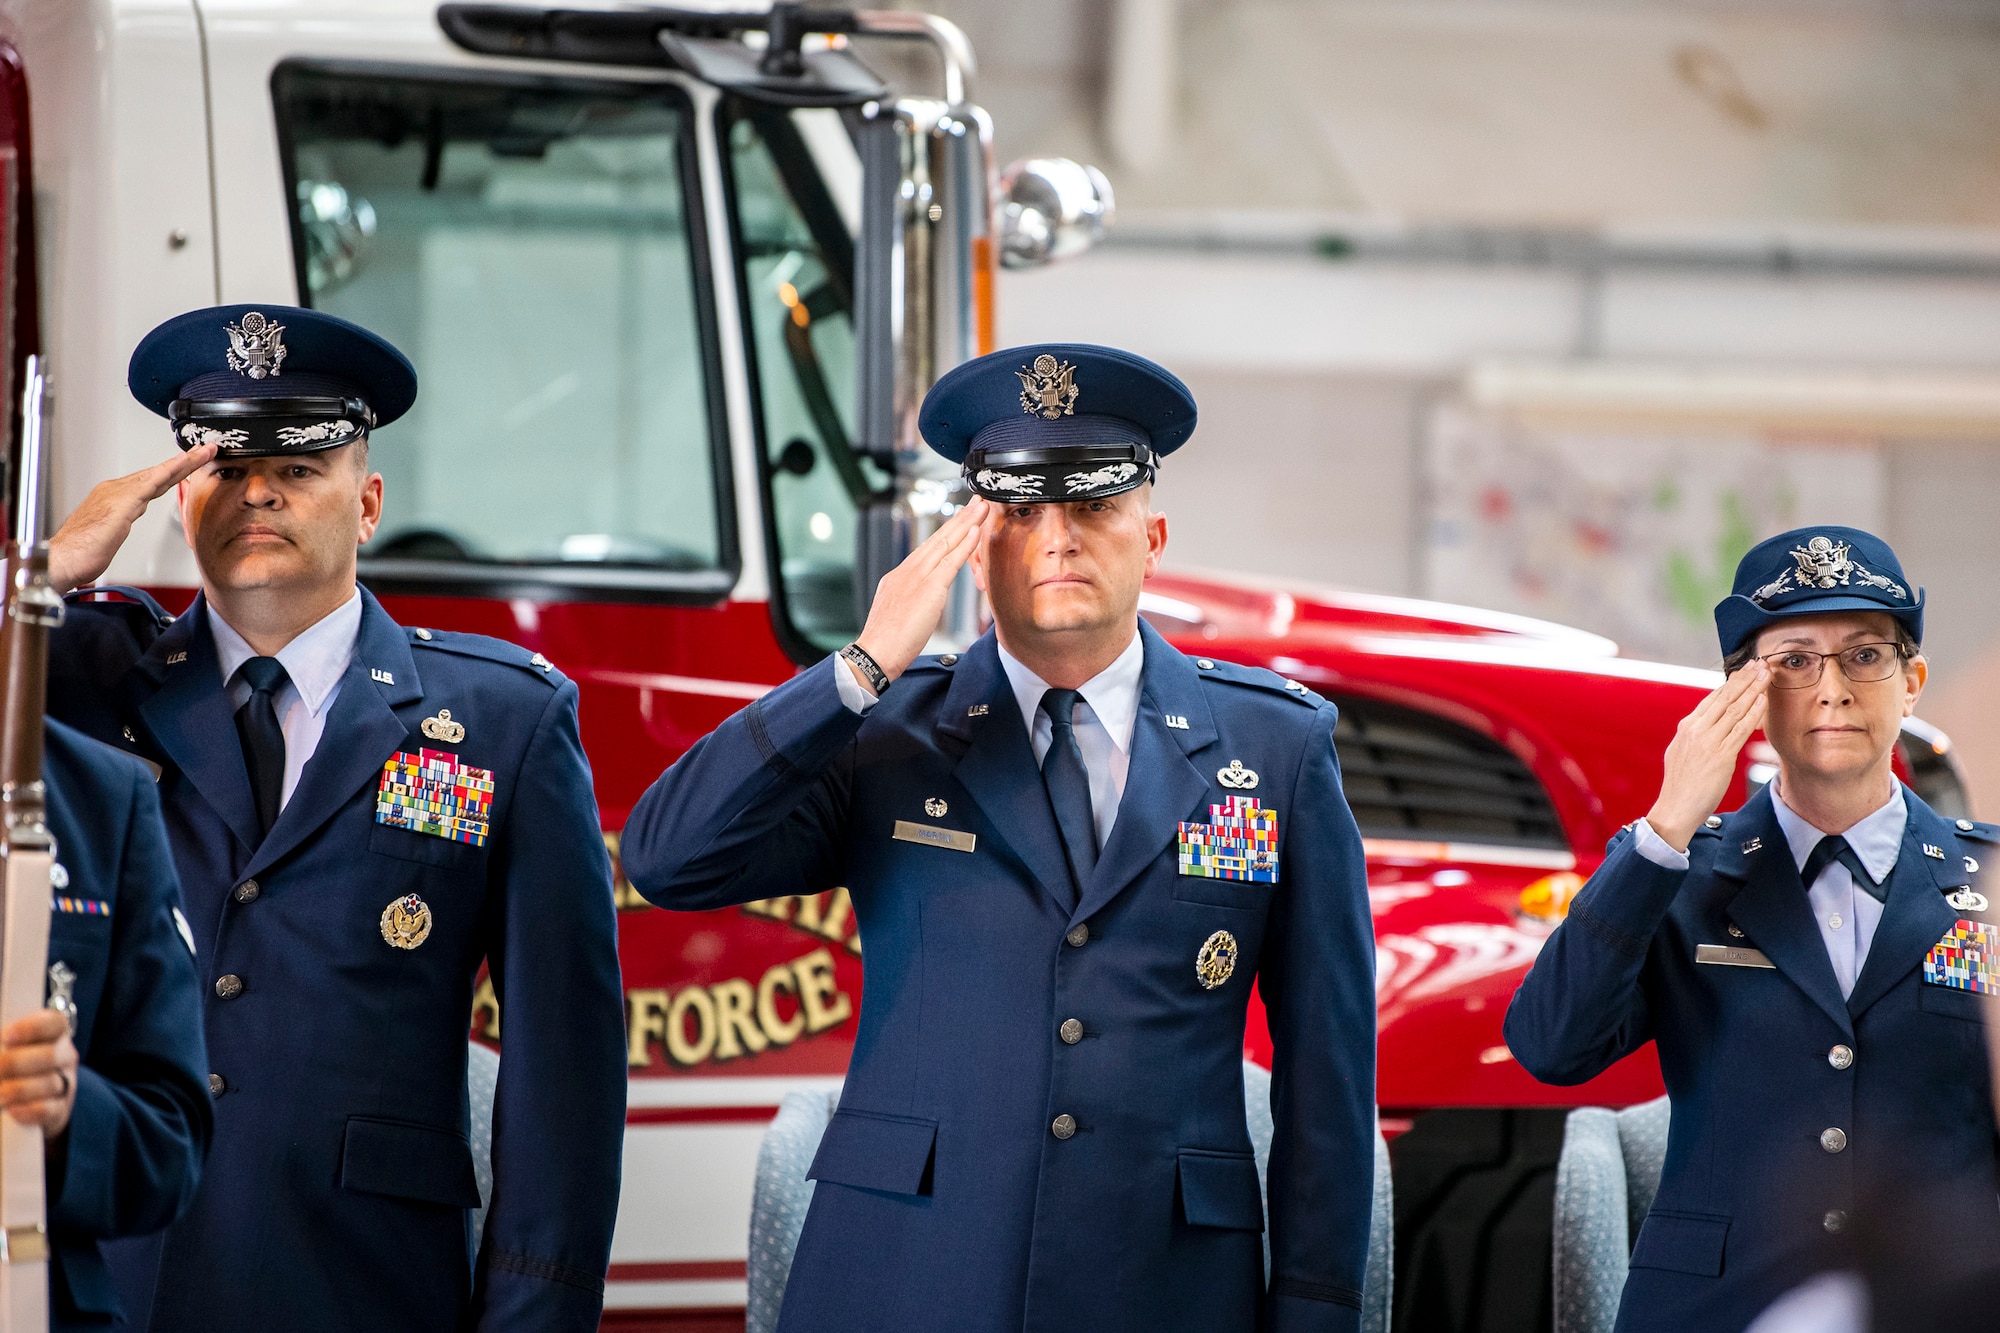 U.S. Air Force Col. Brian Filler, left, 501st Combat Support Wing commander, Col. Richard Martin, center, 423d Air Base Group outgoing commander, and Col. Valarie Long, 423d ABG incoming commander, salute during the national anthem at RAF Alconbury, England, July 25, 2022. During the ceremony, Martin relinquished command of the 423d ABG to Long. (U.S. Air Force photo by Staff Sgt. Eugene Oliver)